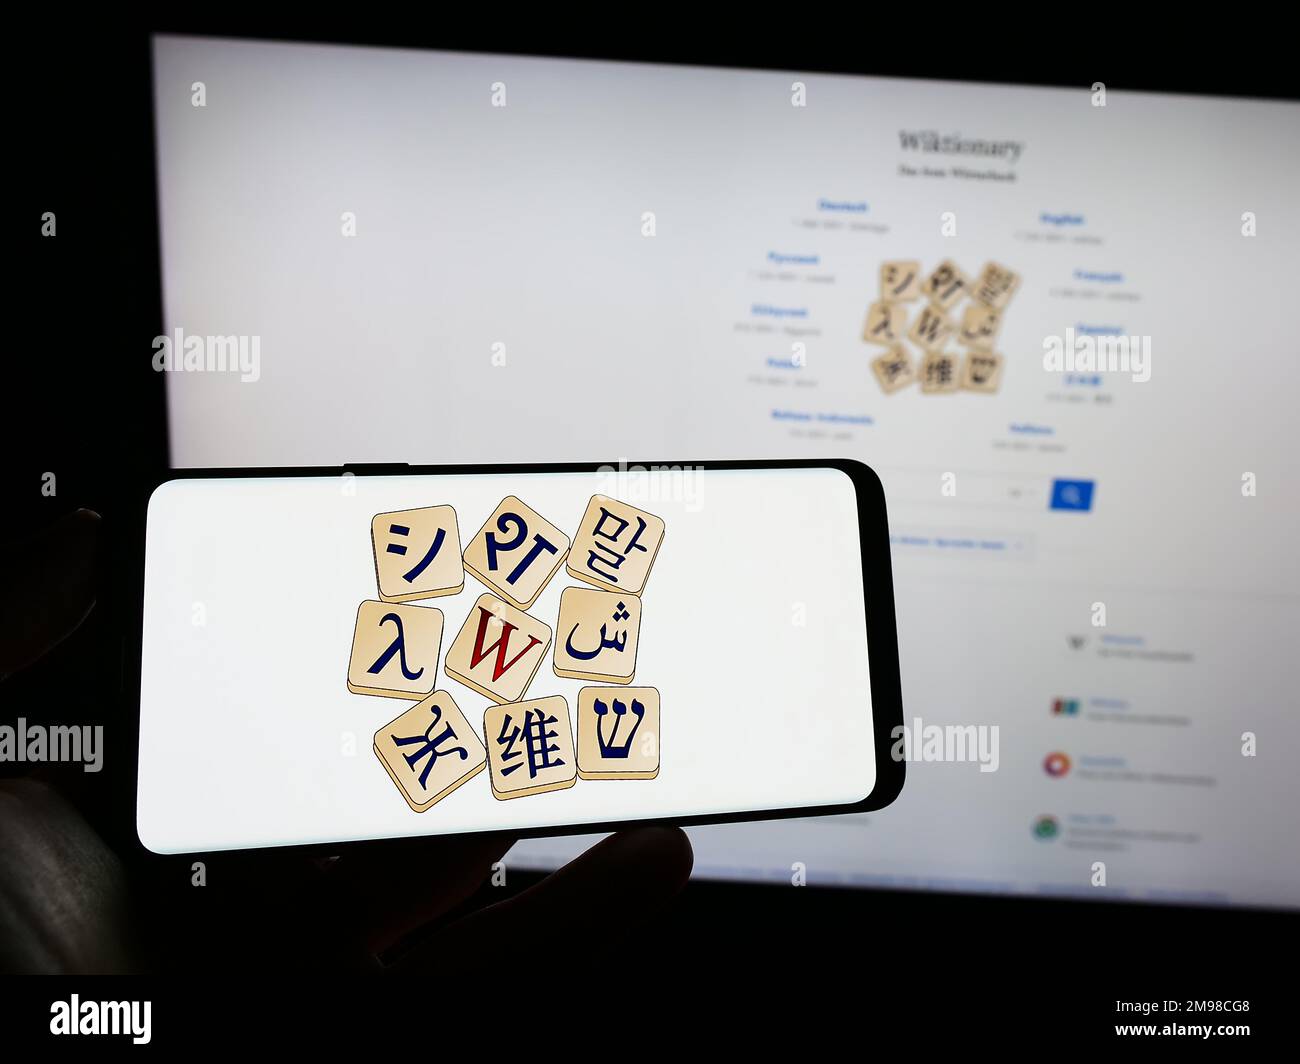 Person holding mobile phone with logo of online dictionary Wiktionary (Wikimedia) on screen in front of web page. Focus on phone display. Stock Photo